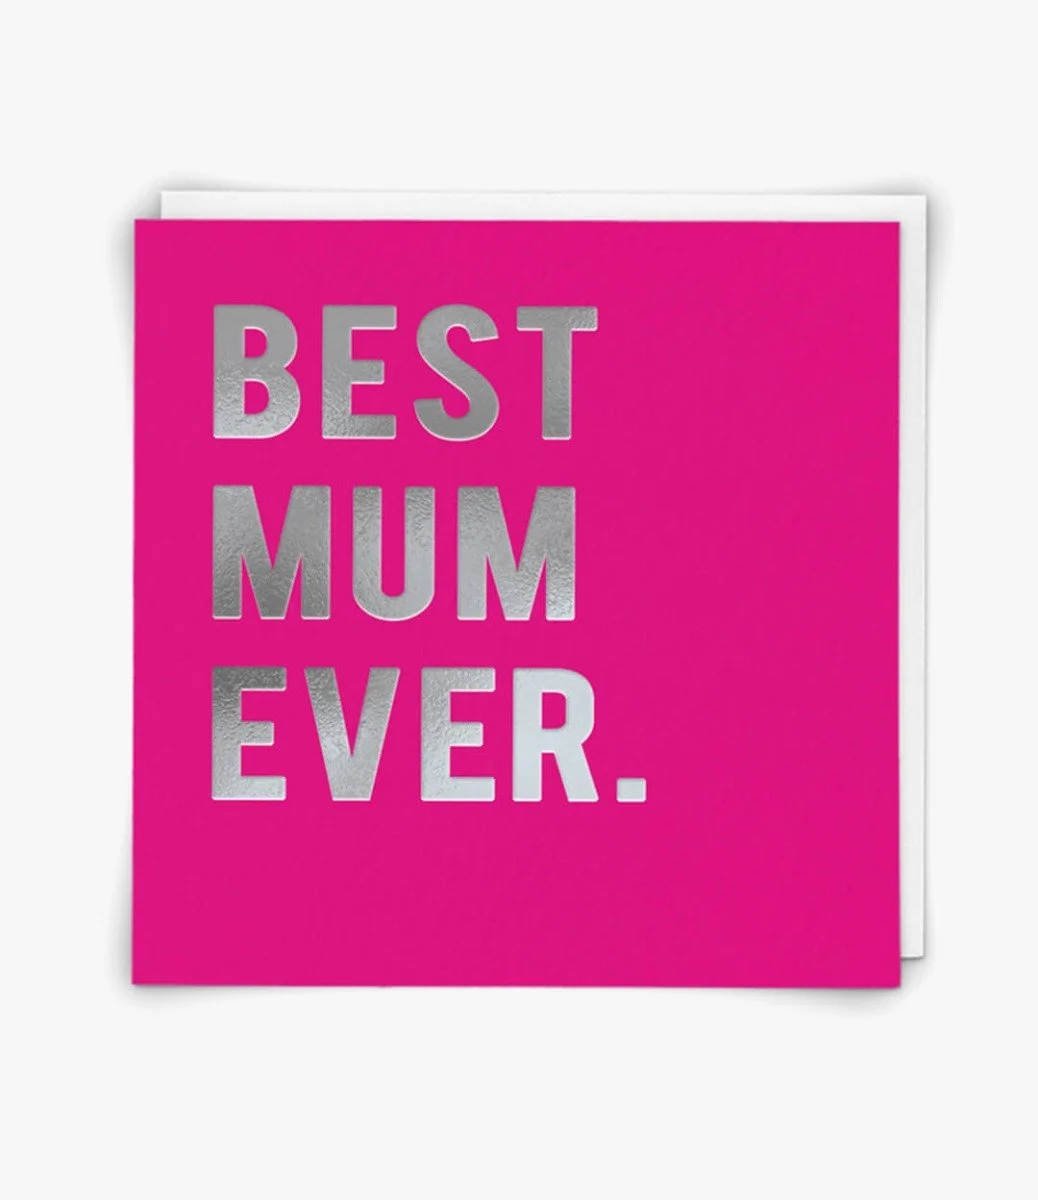 "Best Mum" Contemporary Greeting Card by Redback